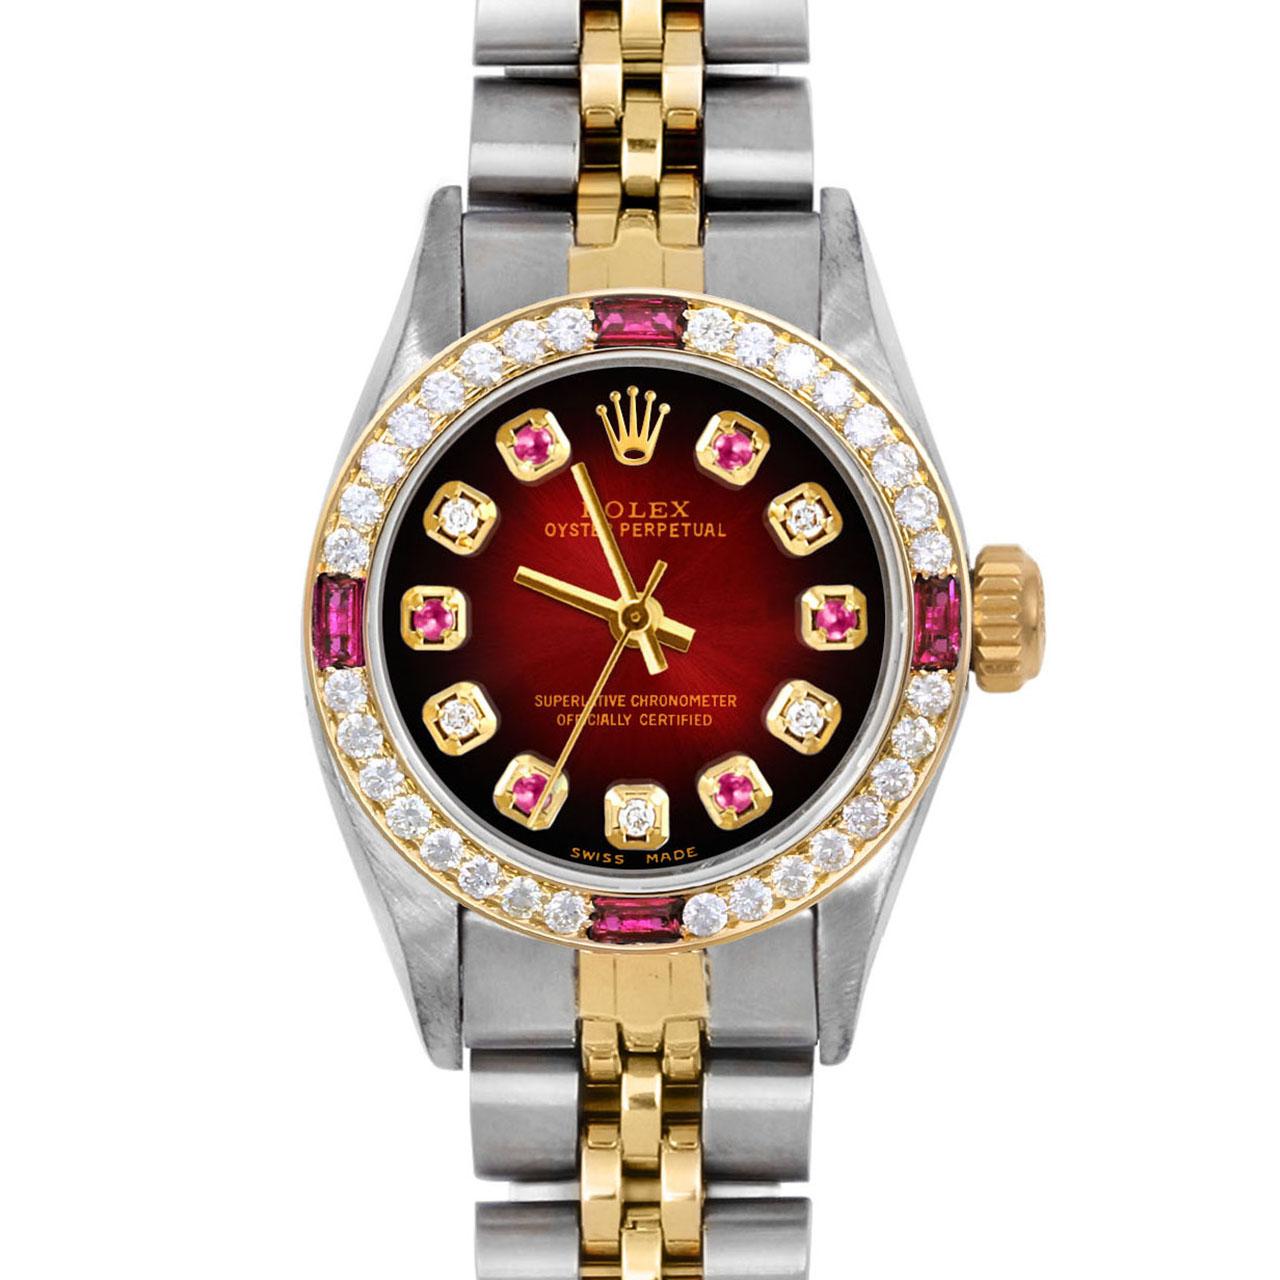 Brand : Rolex
Model : Oyster Perpetual 
Gender : Ladies
Metals : 14K Yellow Gold / Stainless Steel
Case Size : 24 mm
Dial : Custom Red Vignette Ruby Diamond Dial (This dial is not original Rolex And has been added aftermarket yet is a beautiful